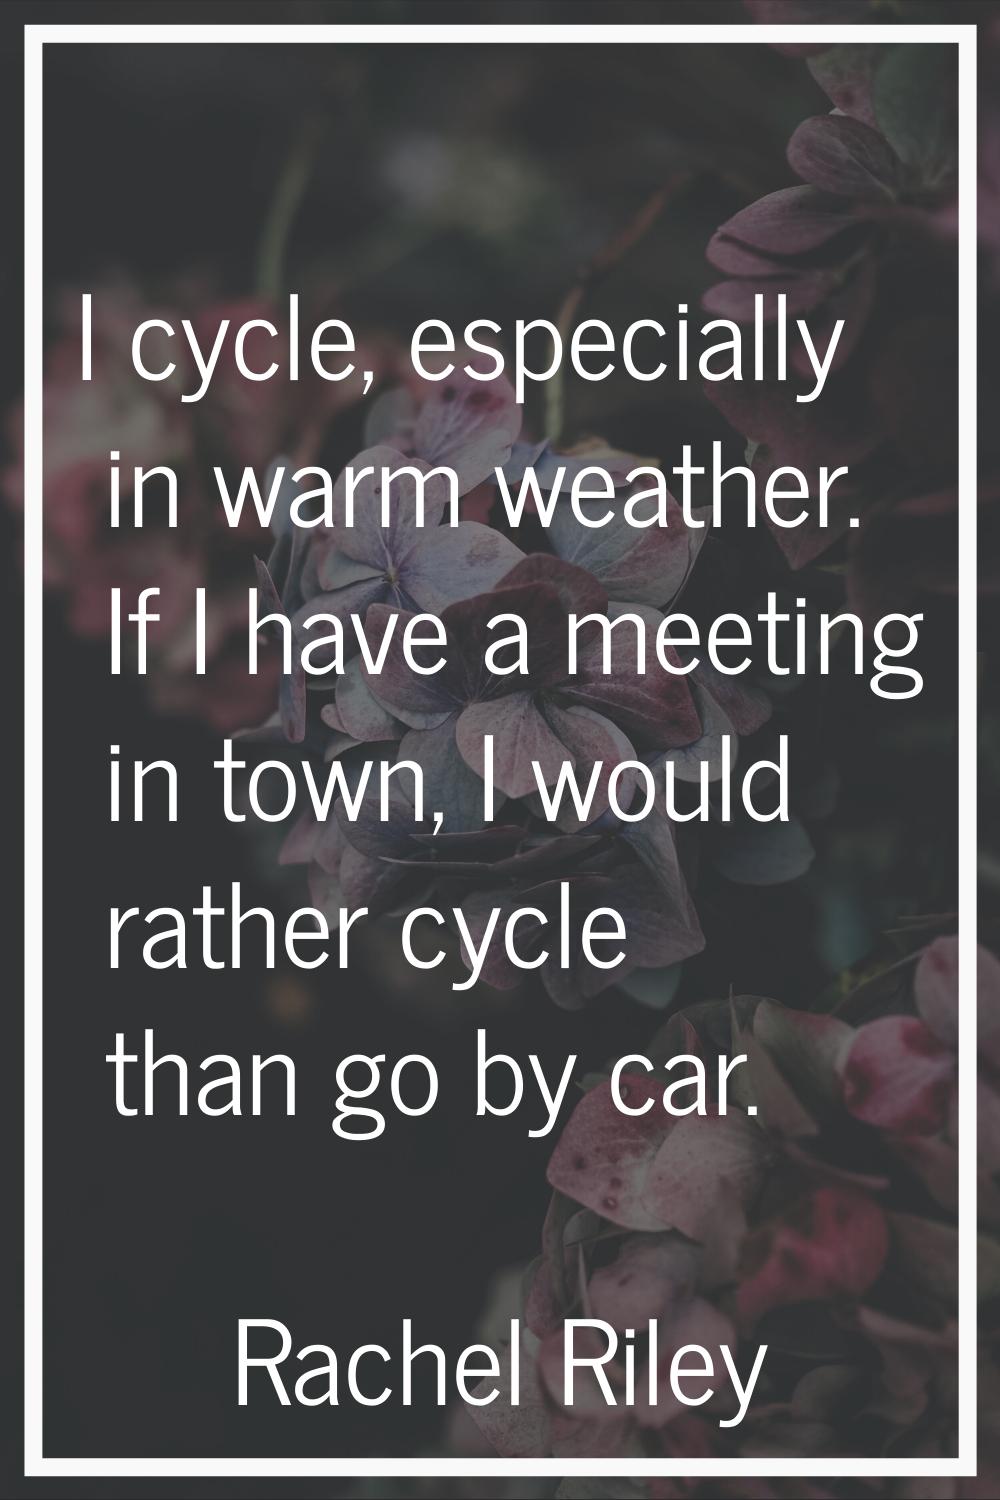 I cycle, especially in warm weather. If I have a meeting in town, I would rather cycle than go by c